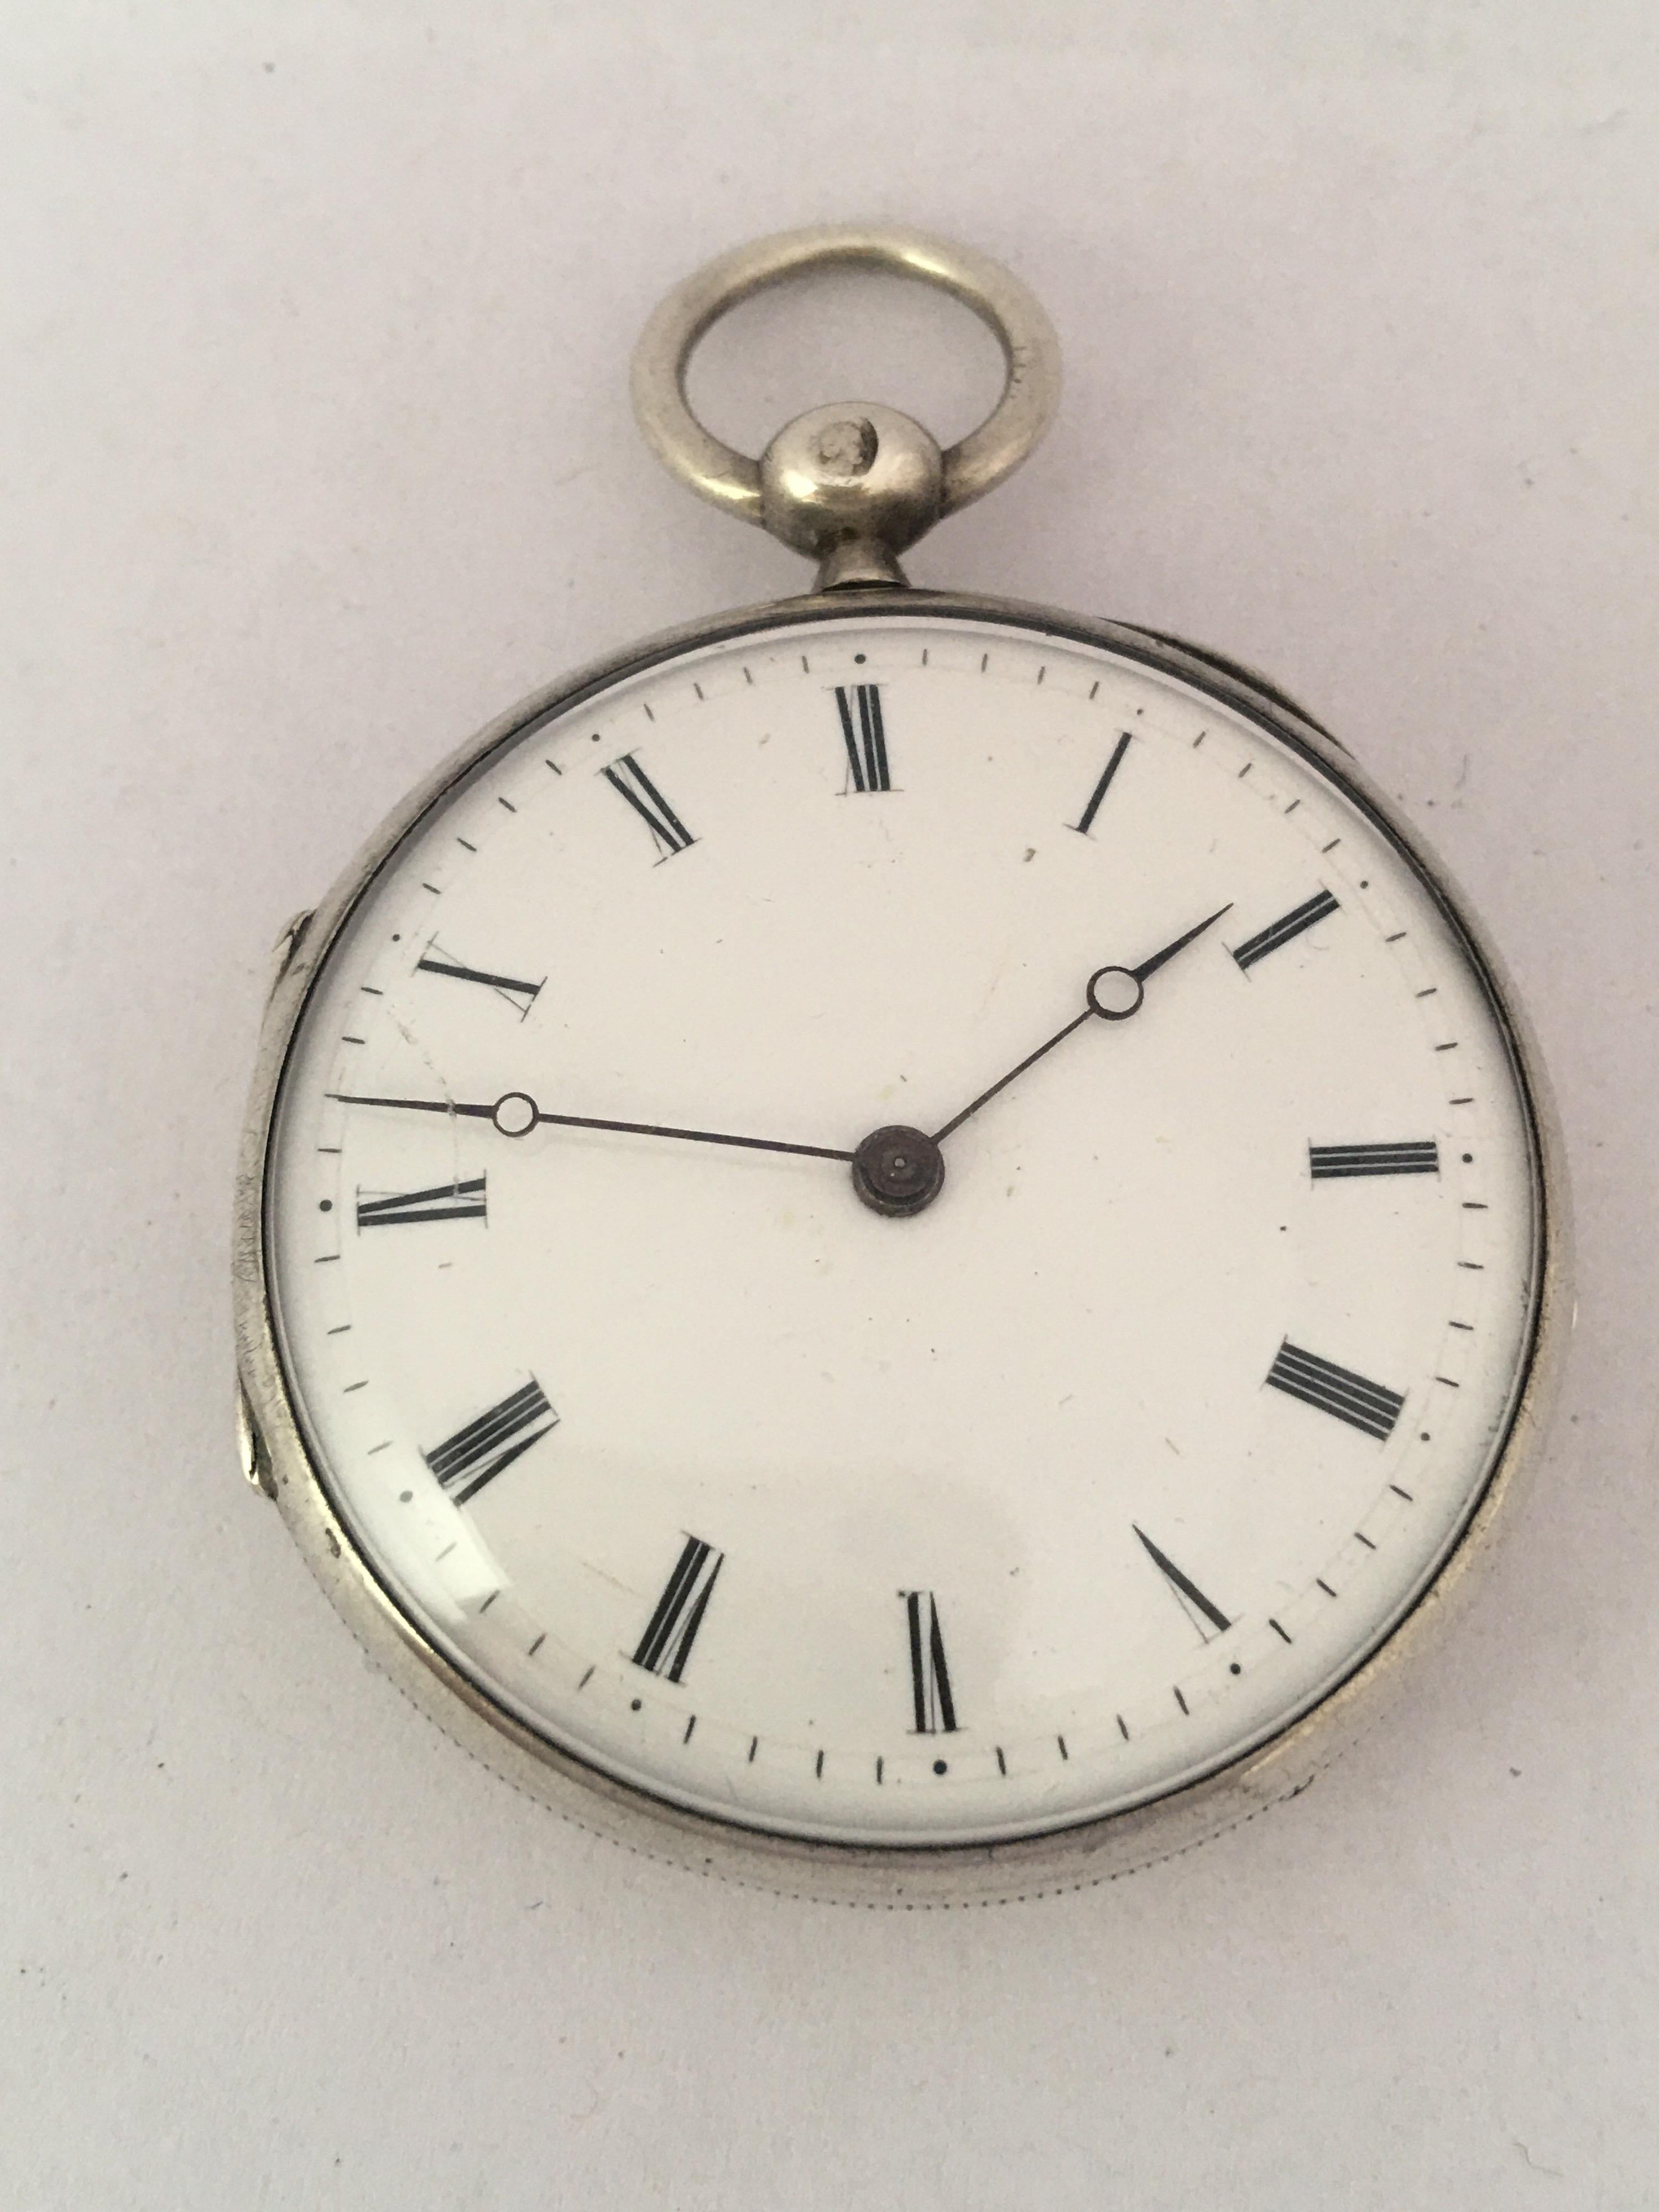 This beautiful and very fine 43mm diameter antique mechanical silver pocket watch is in good working condition and it  is running well. Visible signs of ageing and wear with tiny and light marks on the glass and on the watch case as shown. It comes